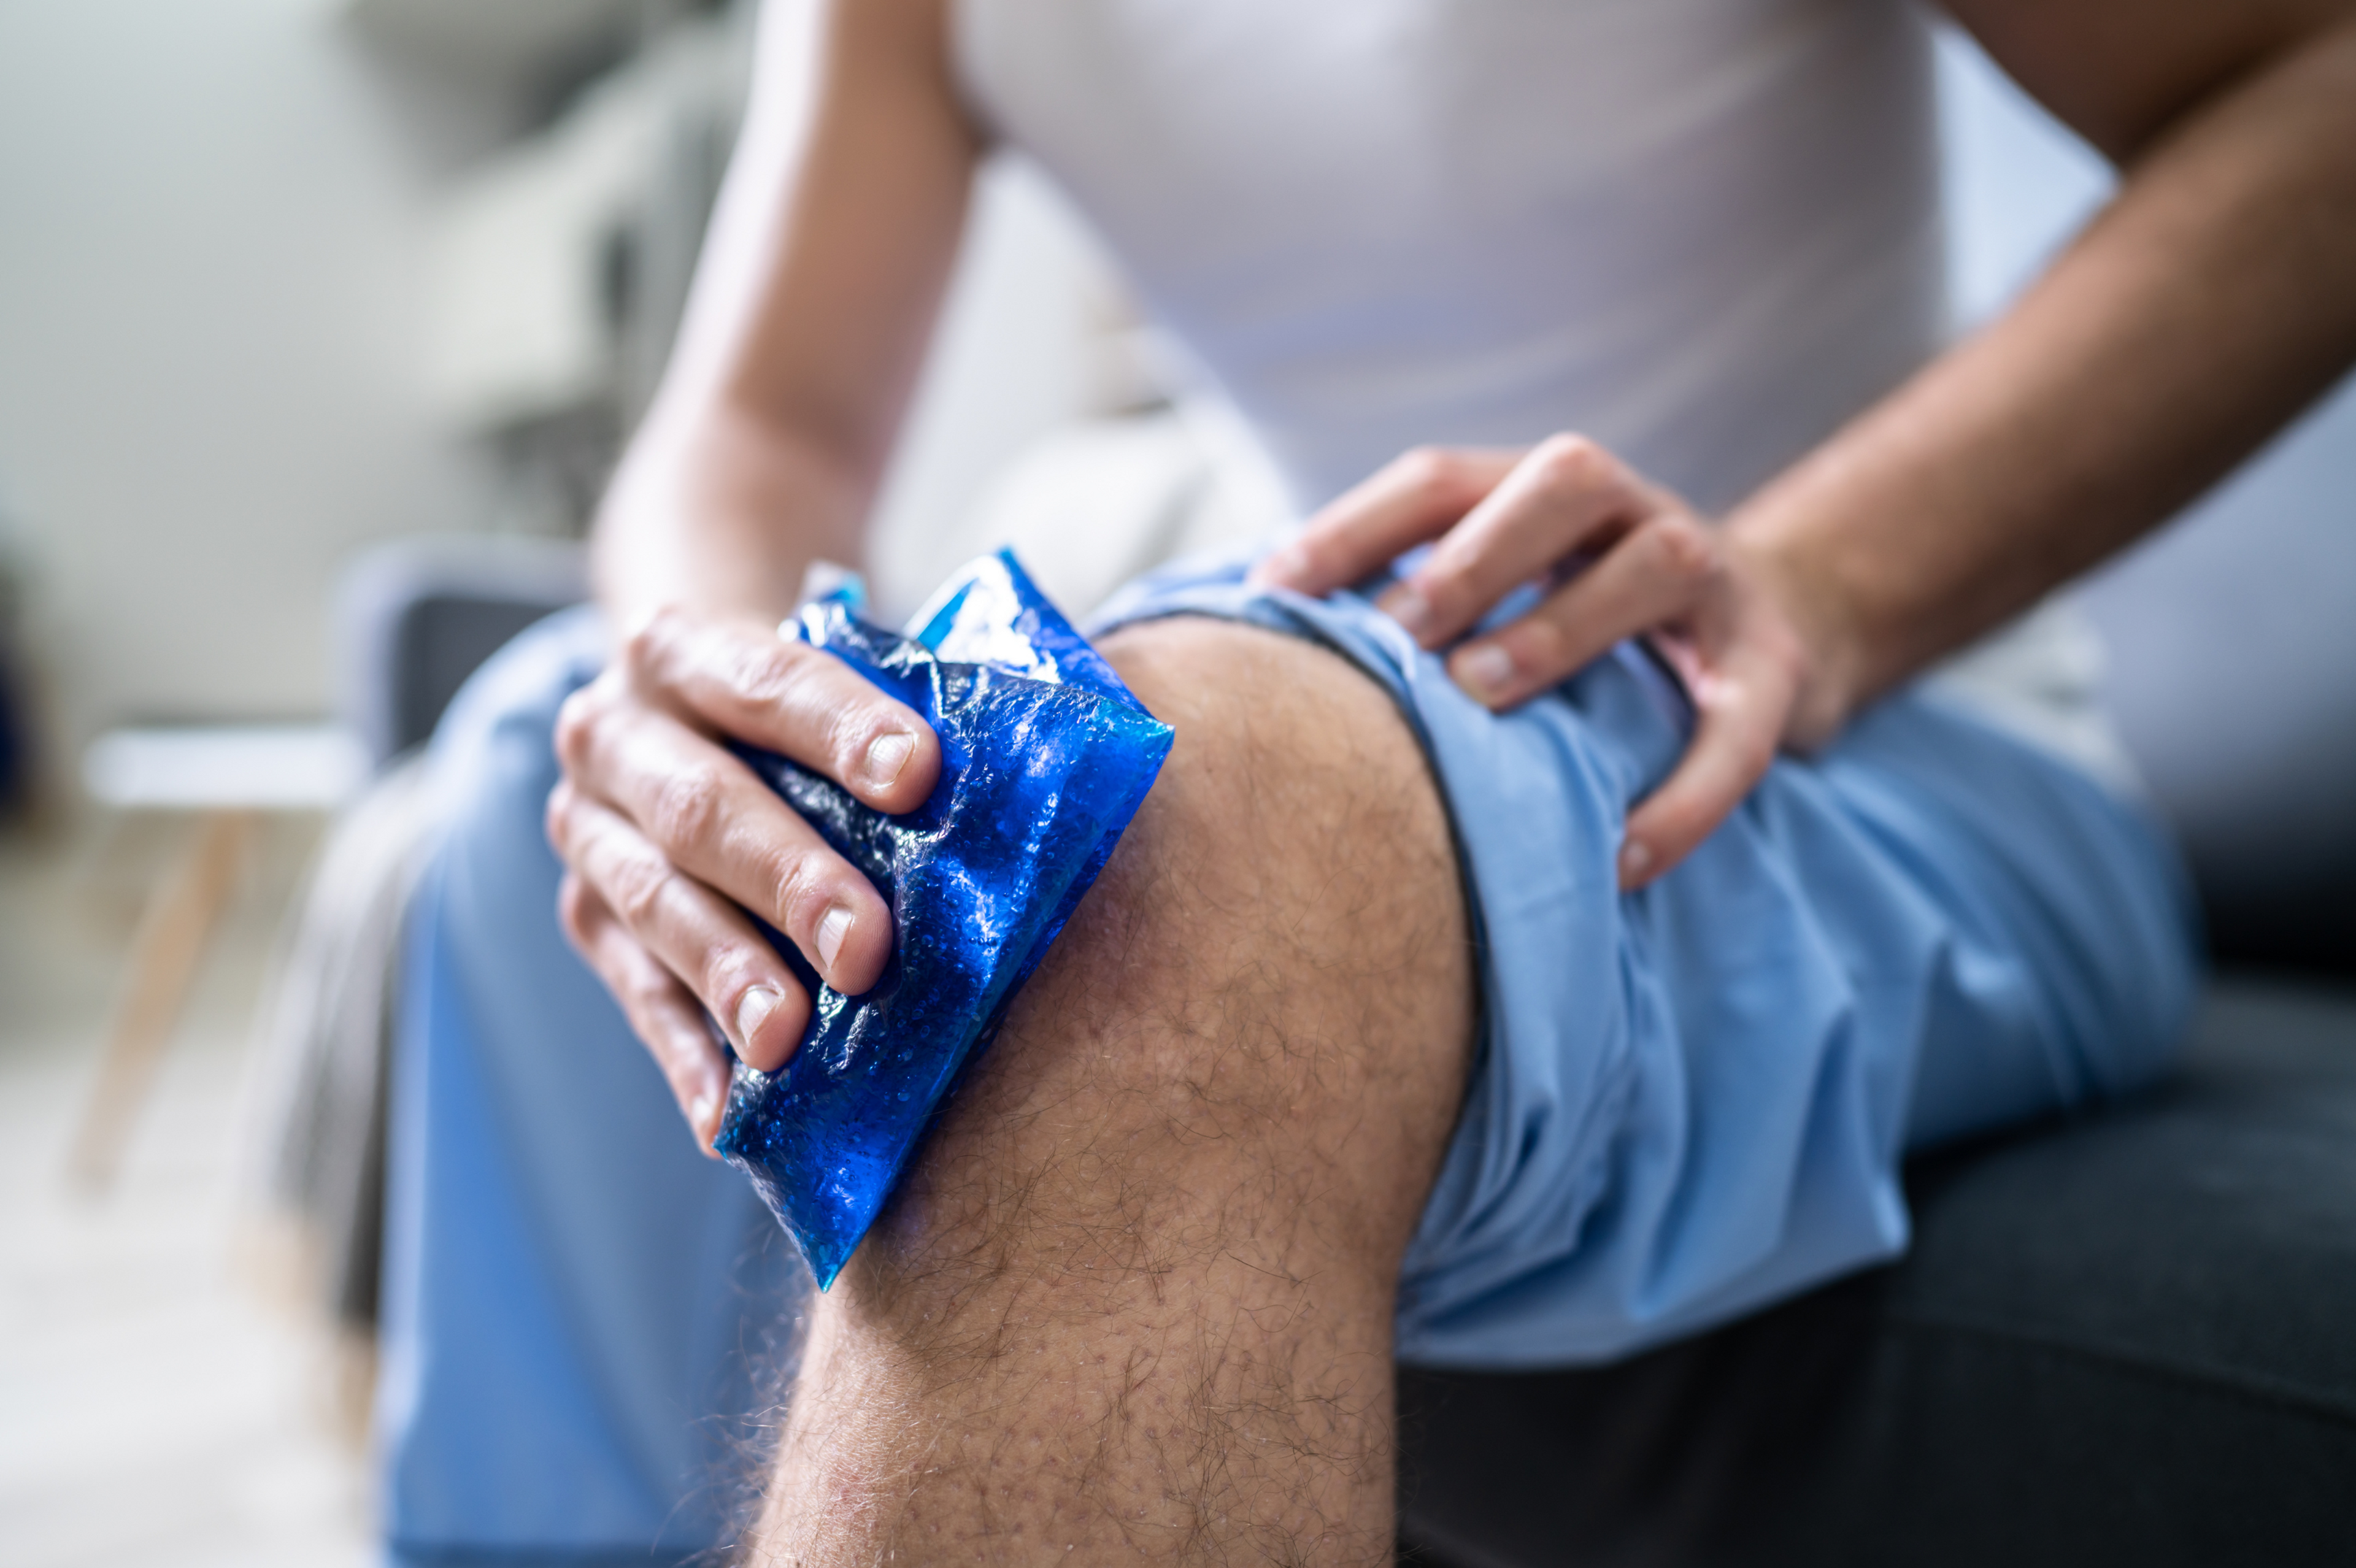 Ice treatment can help reduce the symptoms of a meniscus tear.